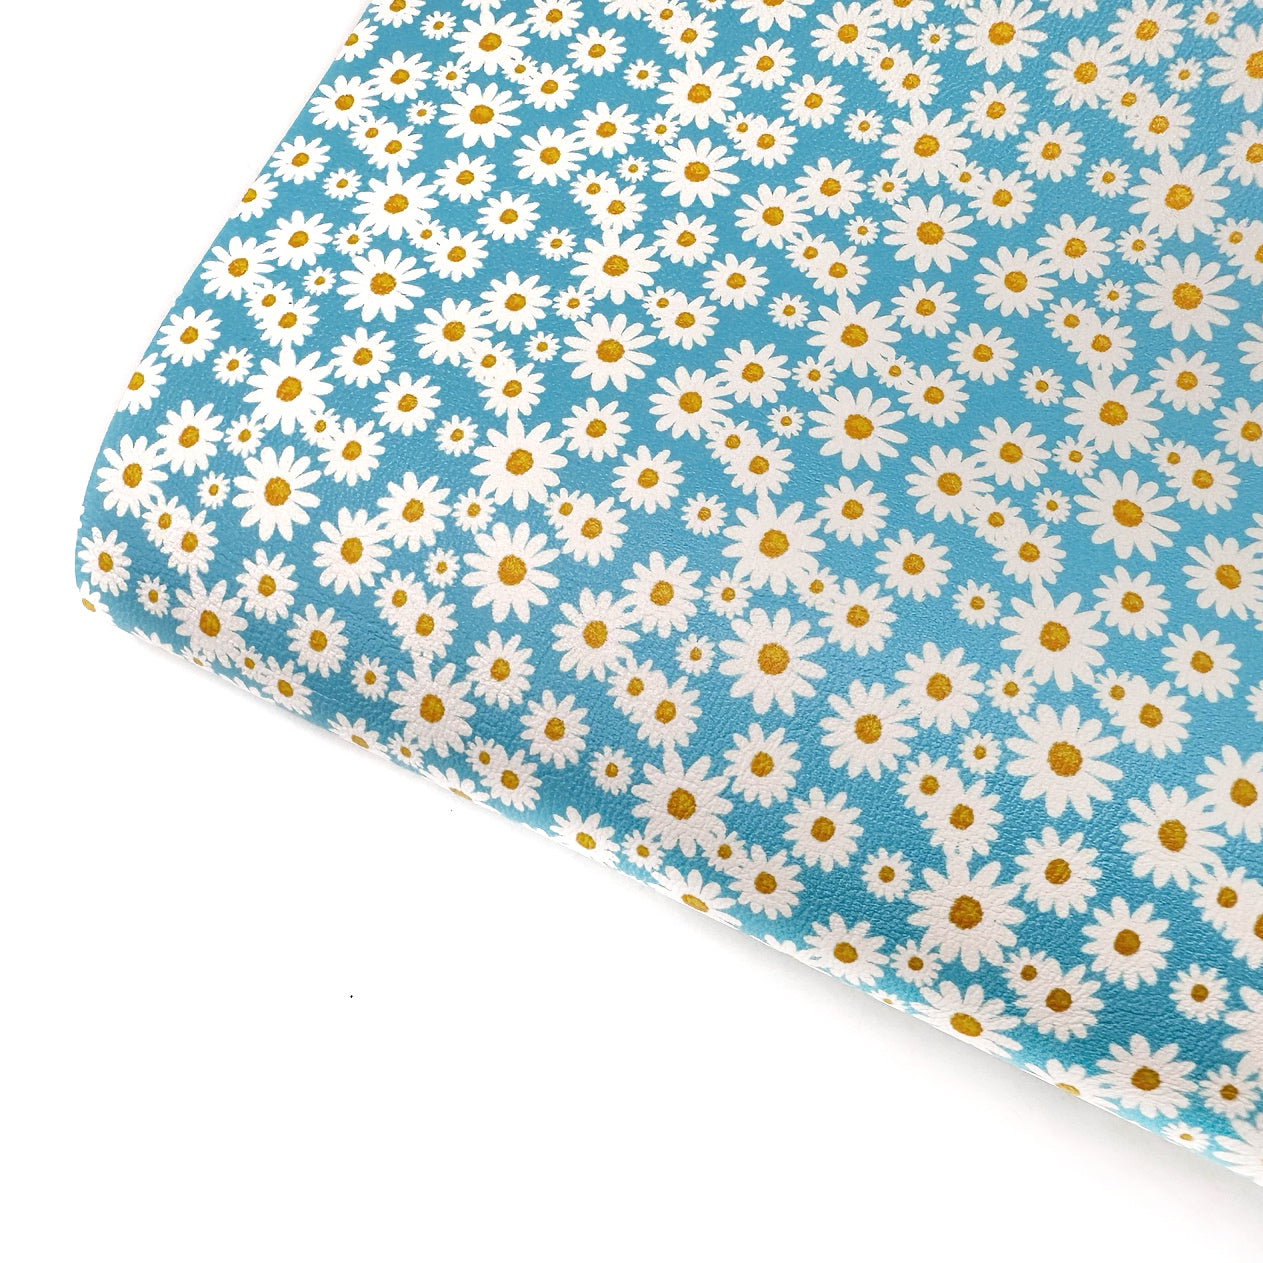 Daisy Girl Premium Faux Leather Fabric Sheets